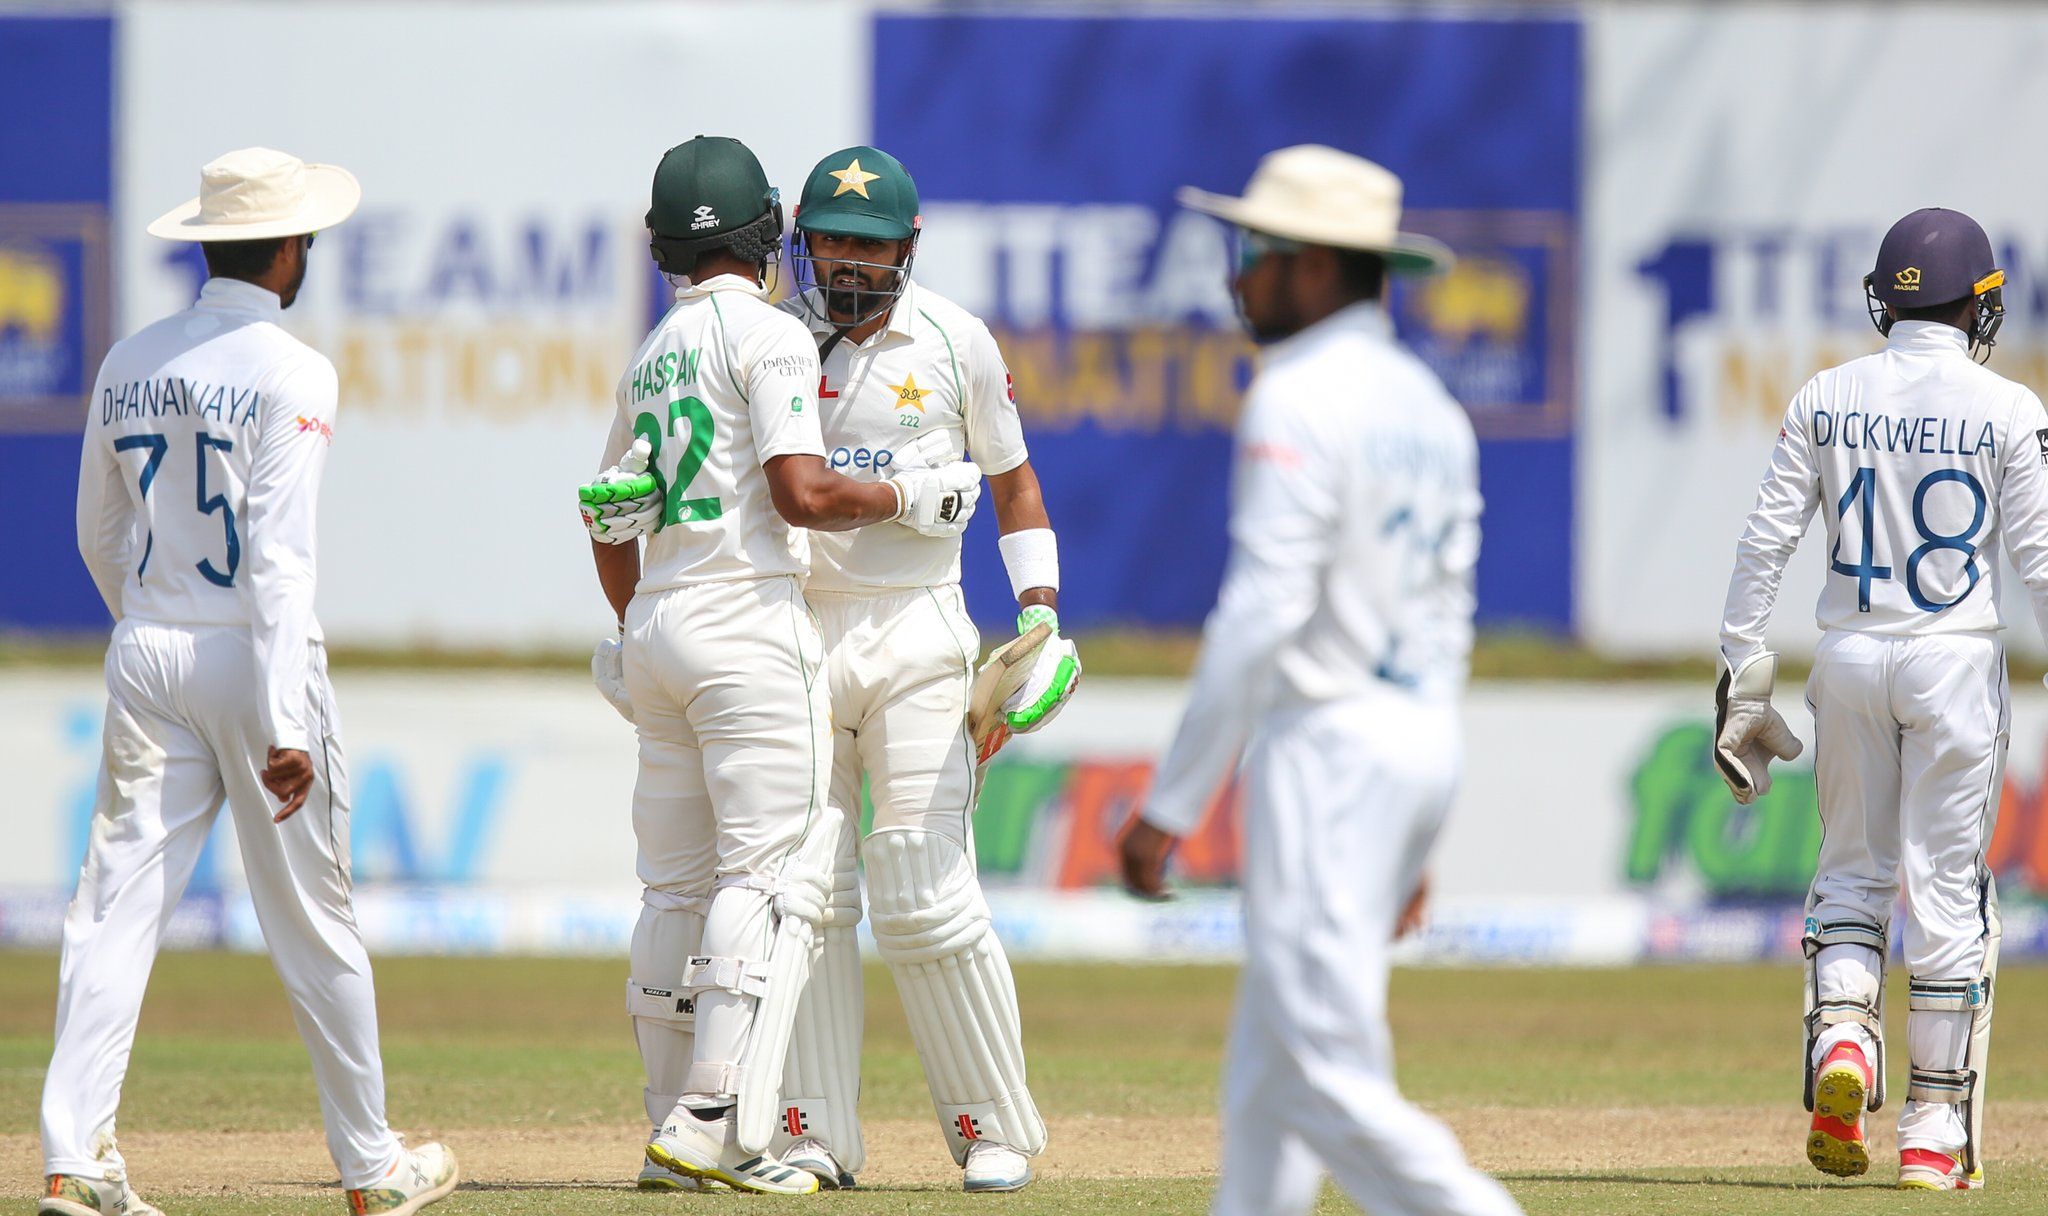 Amid Sri Lanka crisis second Test against Pakistan shifted from Colombo